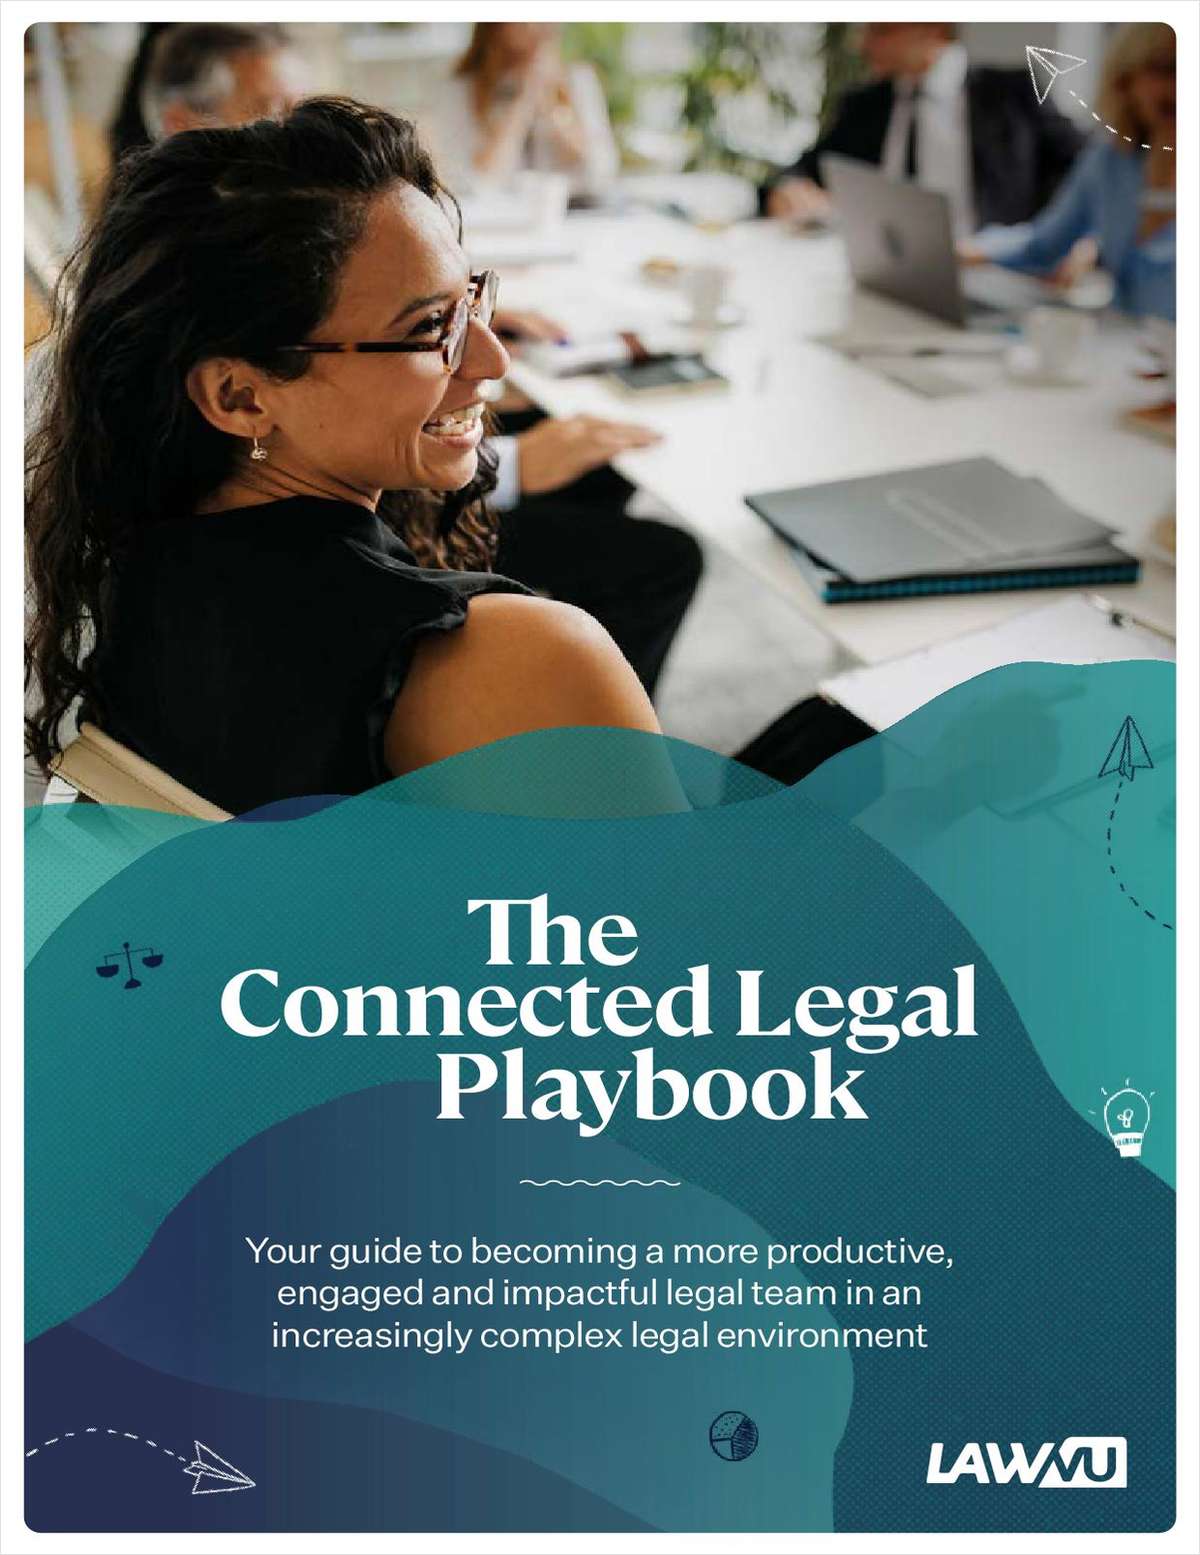 The Connected Legal Playbook